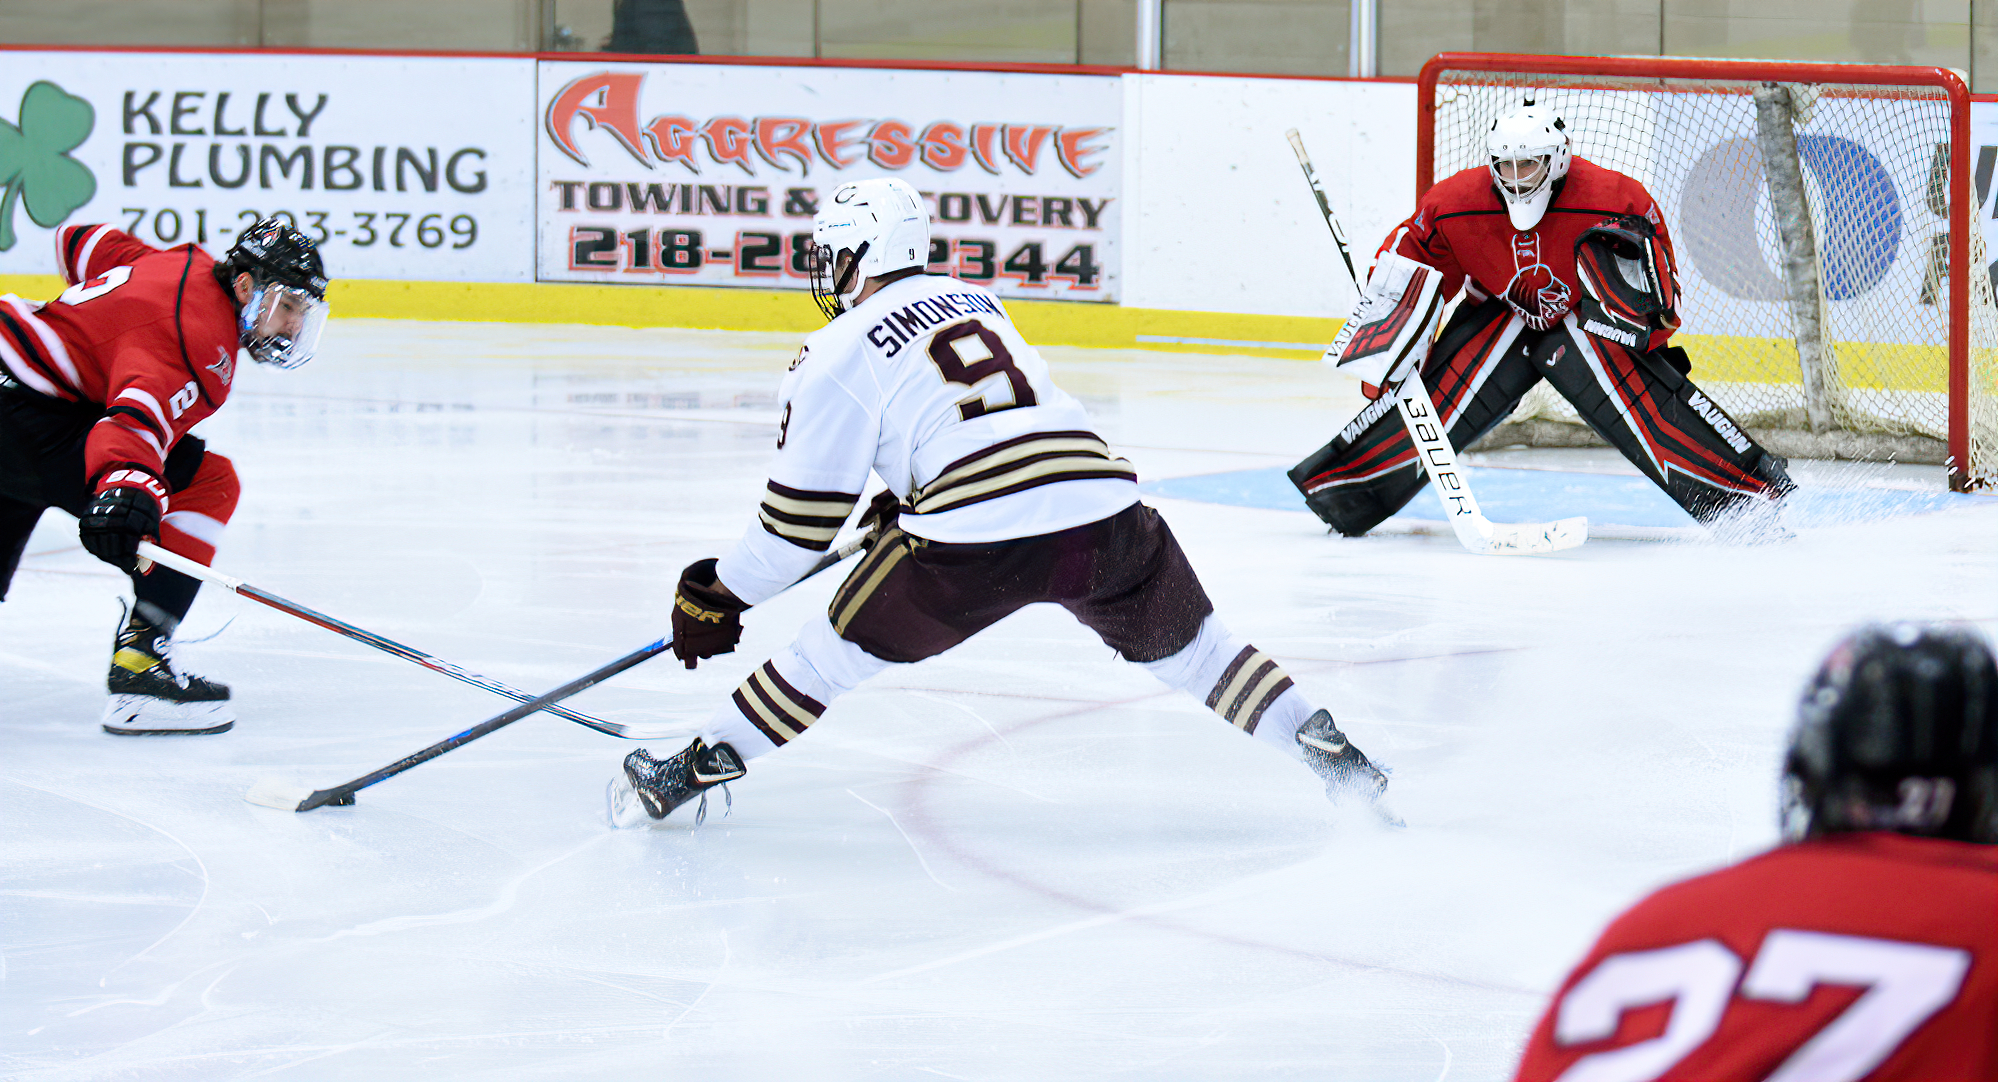 Senior Parker Simonson gets ready to take a shot on goal. He scored a goal in the first period in the Cobbers' series finale with UW-River Falls.